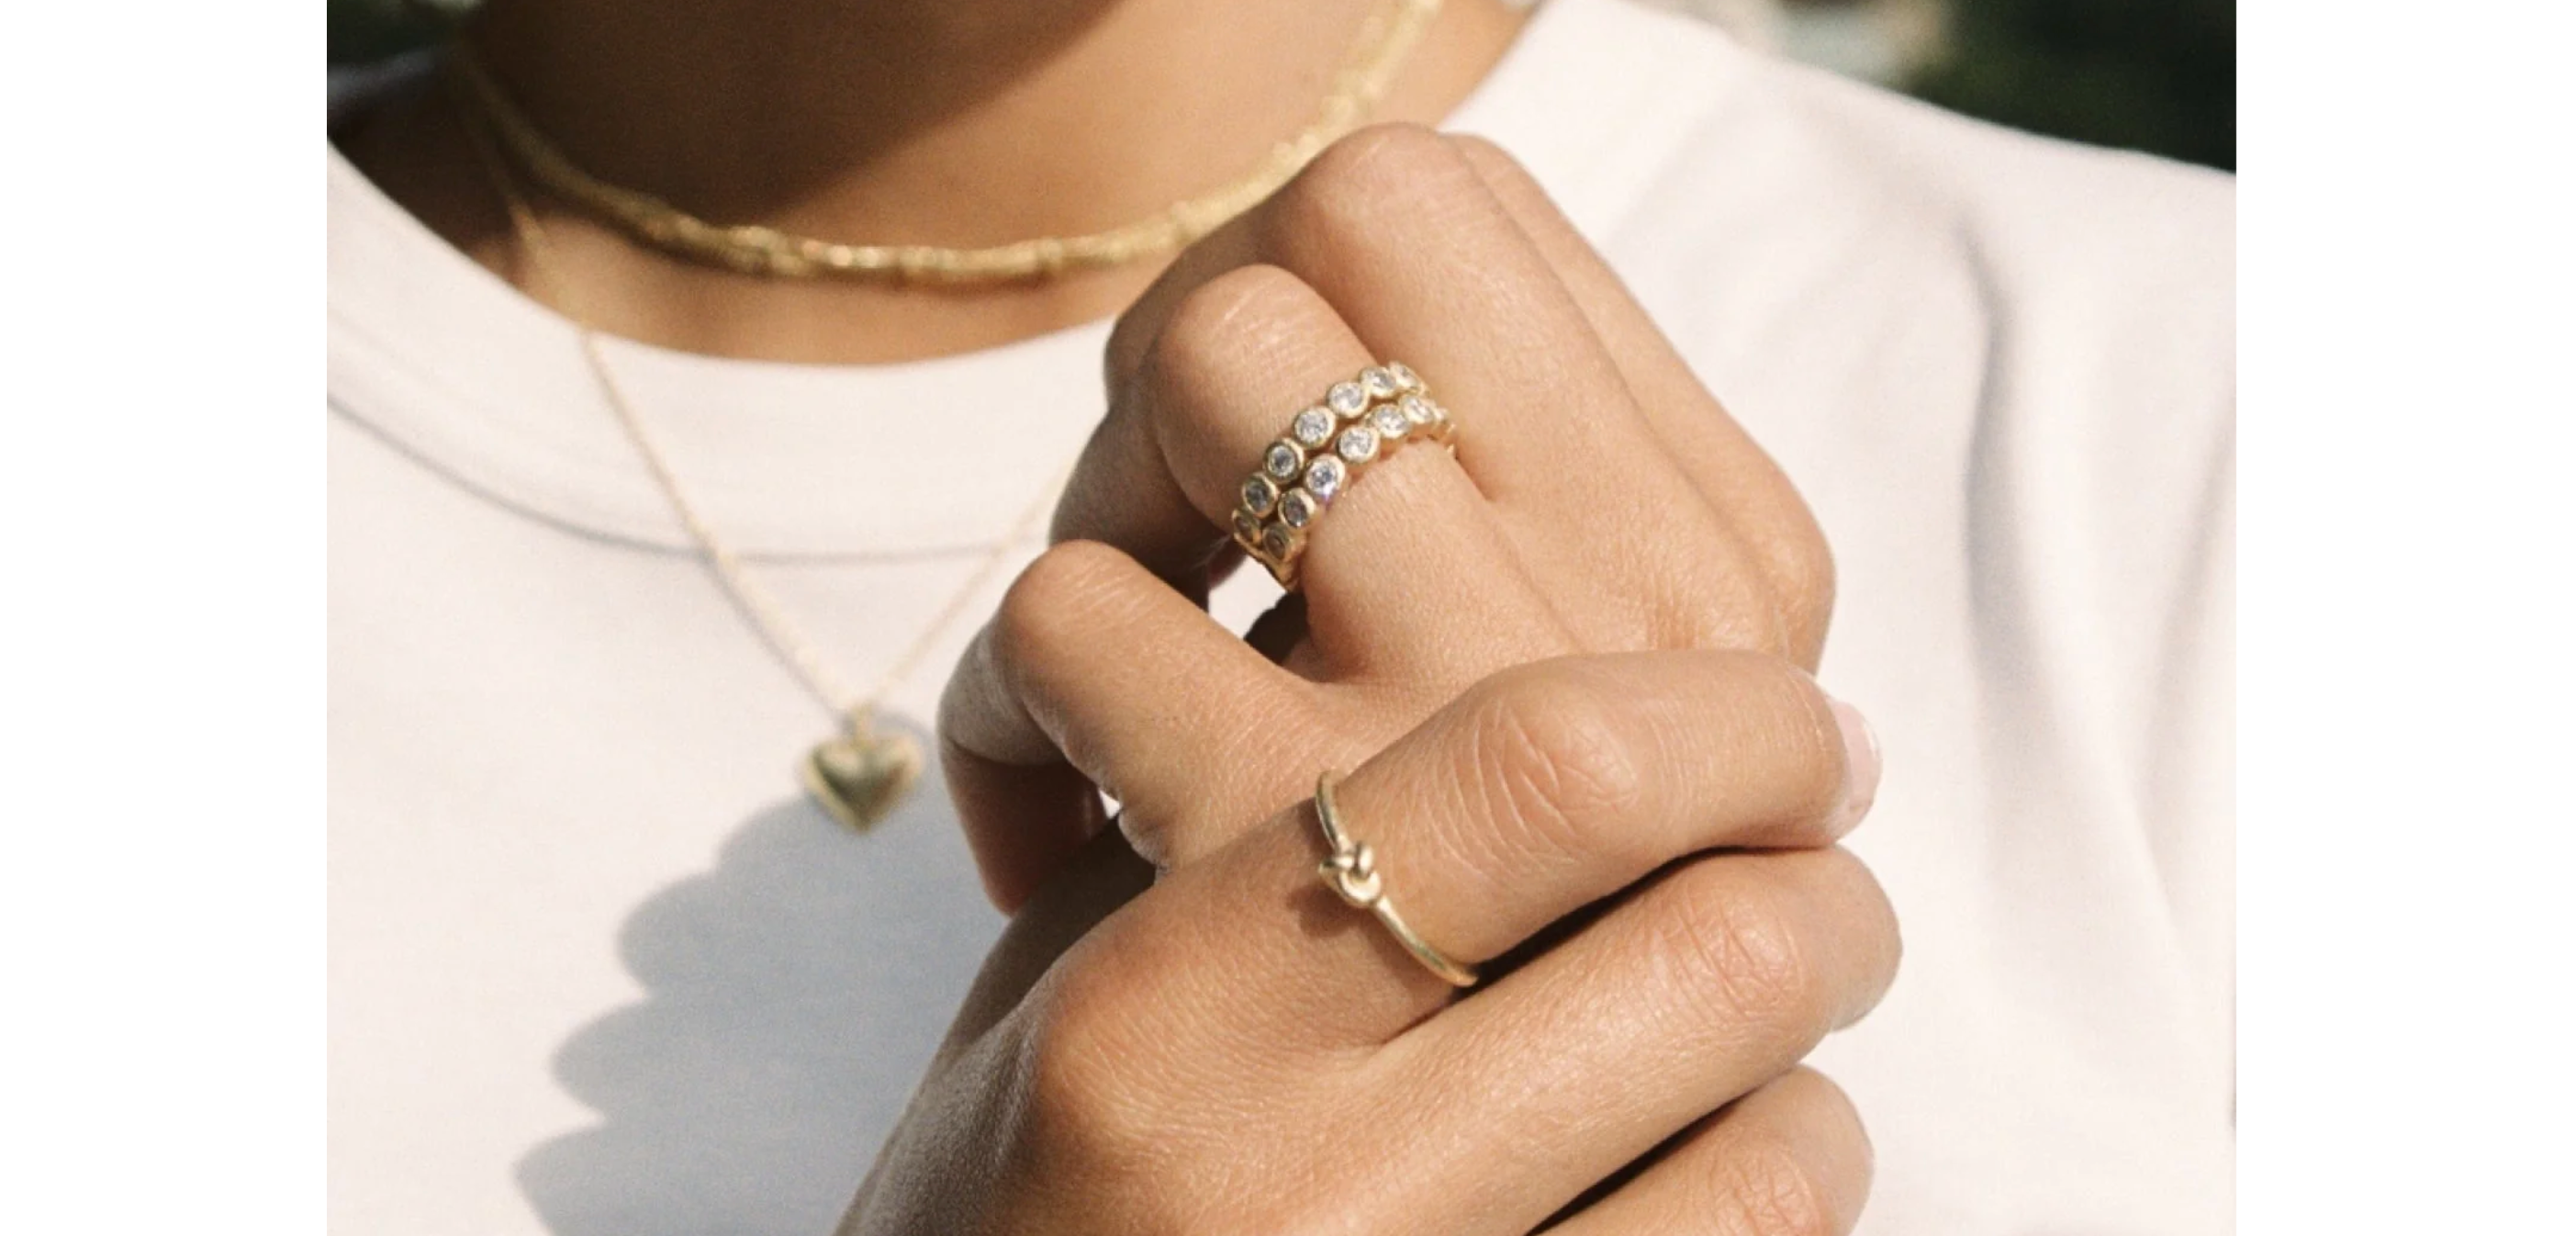 The Golden Guide: How to Choose the Best Gold-Plated Ring as a Gift